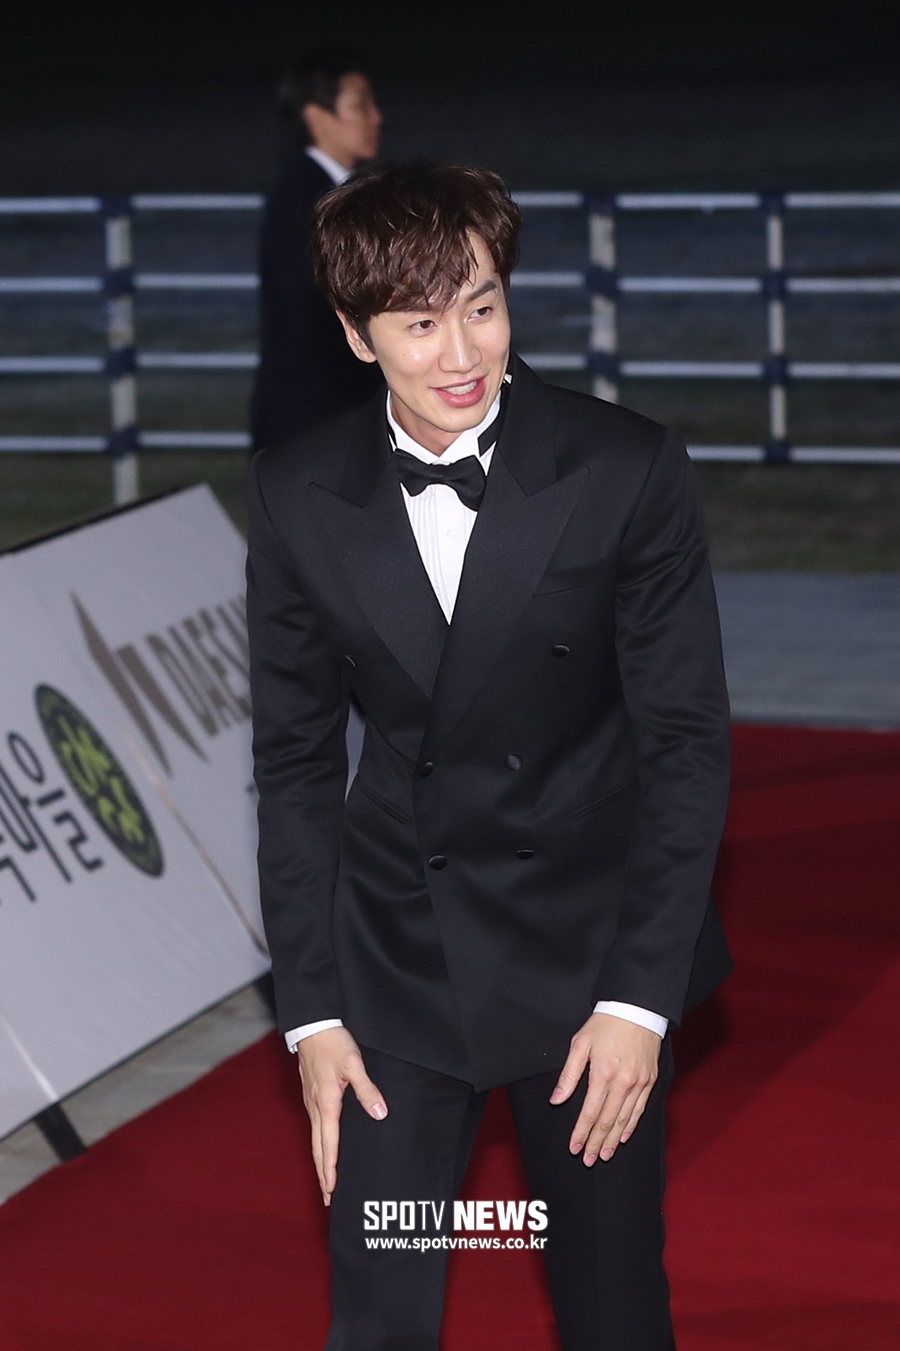 Actor Lee Kwang-soo is expected to miss the program recording scheduled for shooting SBS Running Man after winning the ankle Fracture award last weekend due to a traffic accident.Lee Kwang-soos agency King Kong by Starship said on the 18th, Lee Kwang-soo, who was on his personal schedule on the afternoon of the 15th, was in contact with a signal violation vehicle.We have been diagnosed with right ankle fracture as a result of a close examination at a nearby hospital, and Lee Kwang-soo is currently undergoing hospitalization procedures and is being treated.The agency said, I would like to ask you to understand that the scheduled schedule is inevitably not available, and I will continue to watch the progress for the time being and concentrate on treatment for recovery.Next up is Lee Kwang-soos admission special.Hello, King Kong by Starship.Lee Kwang-soo, who was on his way to a private schedule on Saturday afternoon, was in contact with a signal violation vehicle.A close examination at a nearby hospital led to a diagnosis of a right ankle fracture, and Lee Kwang-soo is currently undergoing hospitalization procedures.I would like to ask you to understand that the schedule scheduled for this is inevitably not available, and I will continue to watch the progress for the time being and concentrate on treatment for recovery.=